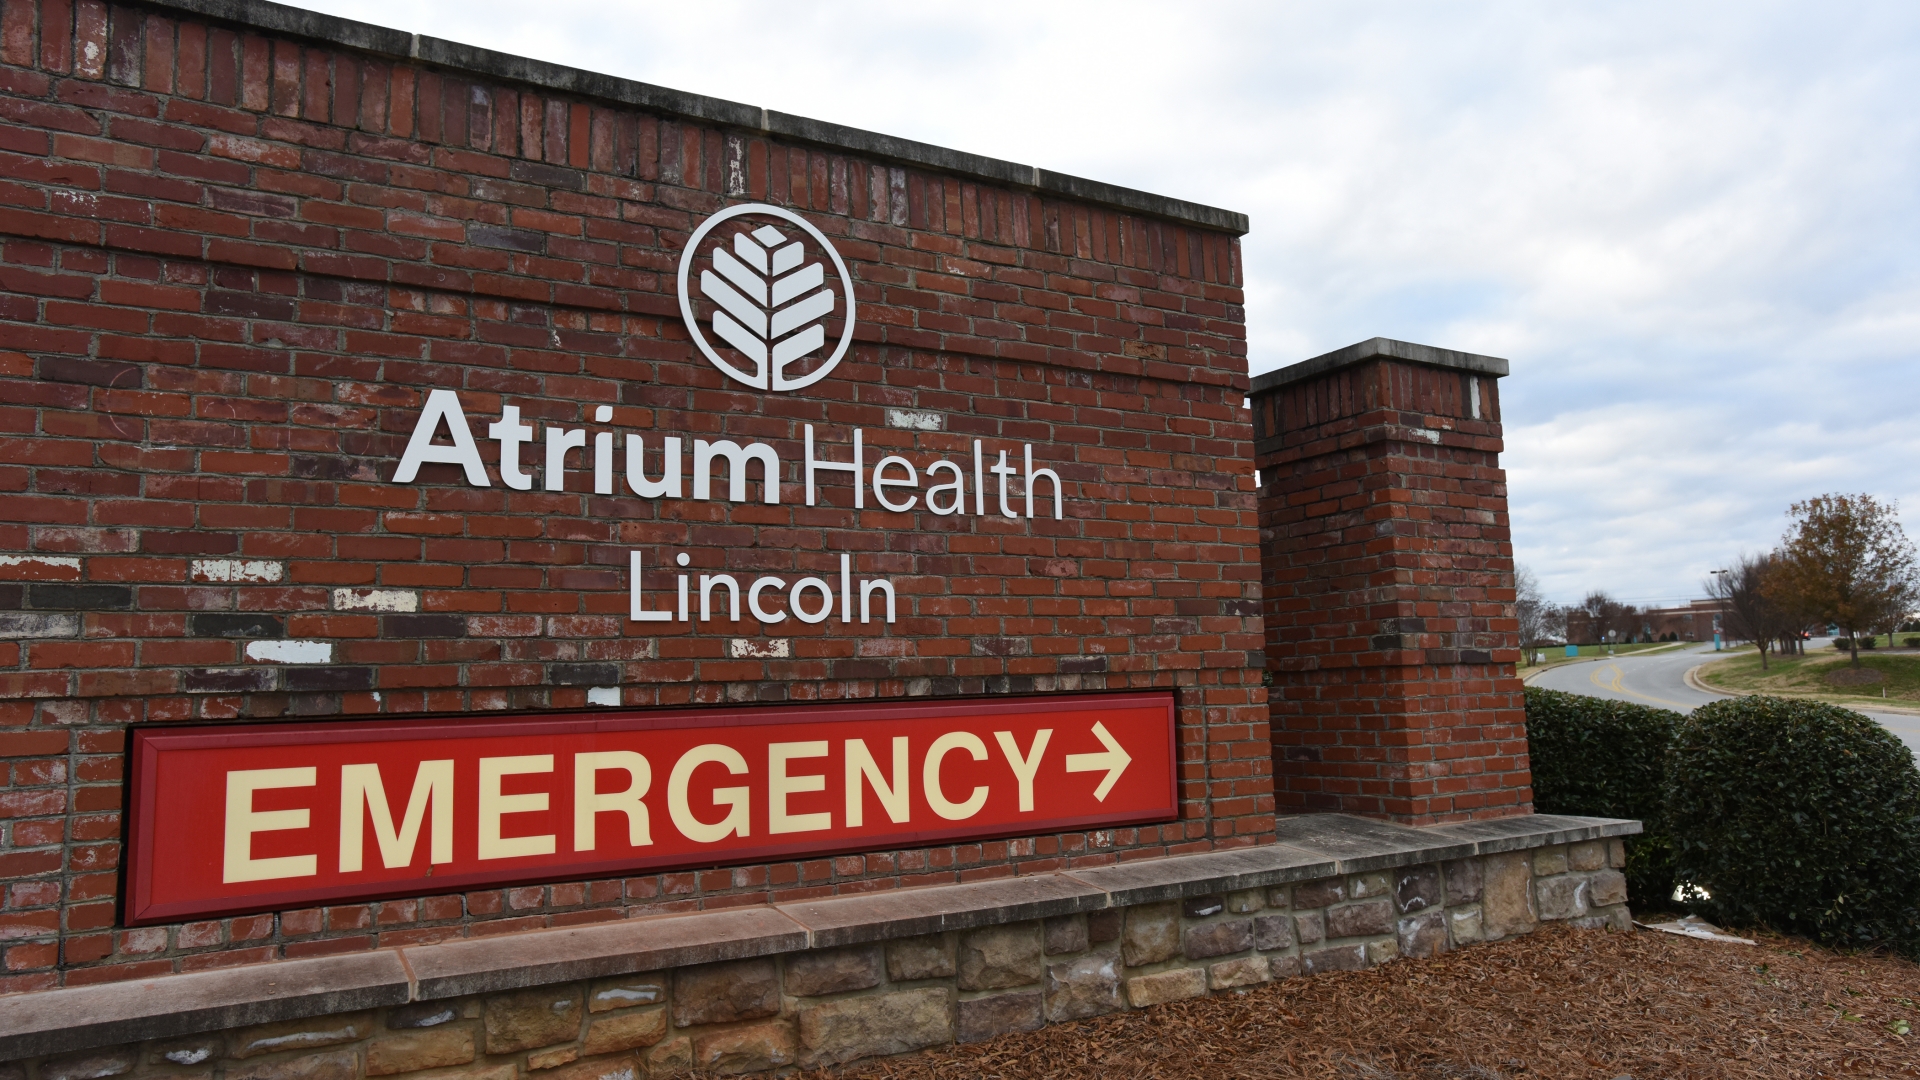 As the healthcare industry continues to increase its attention on security, Atrium Health is furthering its goal of ensuring the safety of each patient, teammate and visitor by implementing enhanced security measures across its system. Most recently, Atrium Health Lincoln began implementing enhanced security measures in its Emergency Department. 